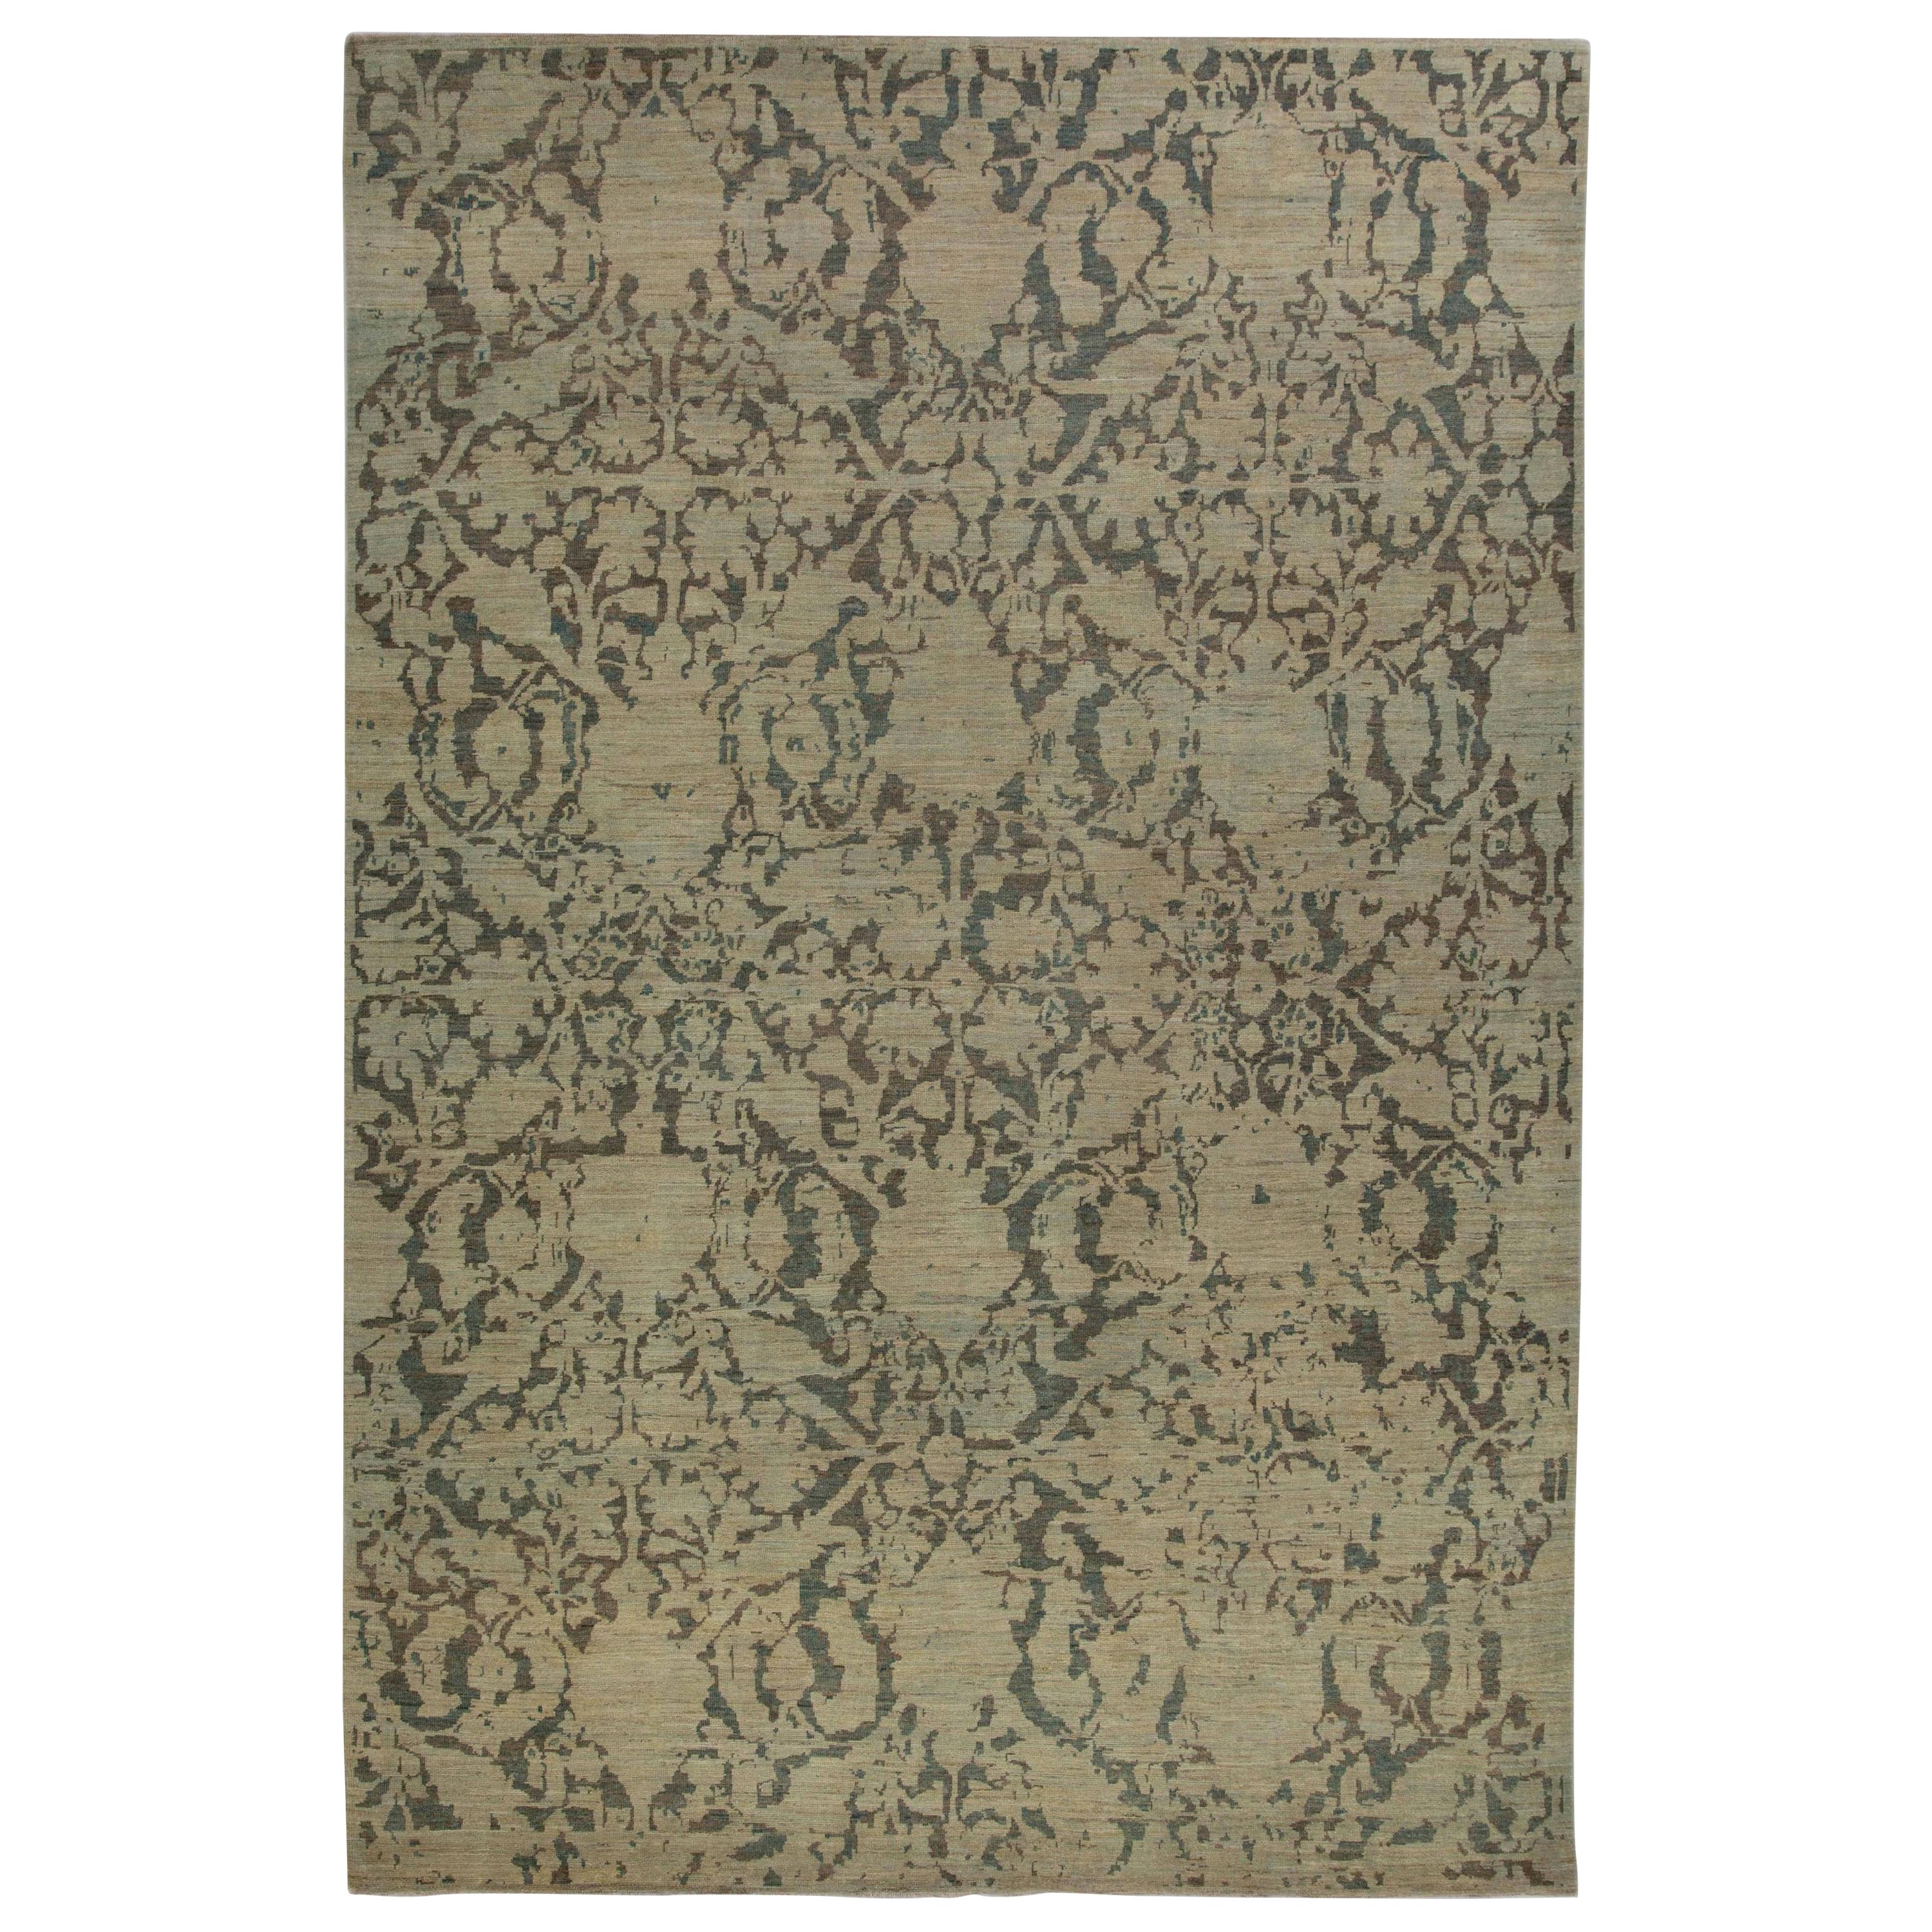 Contemporary Turkish Rug Sultanabad Style with Large Flower Heads Design